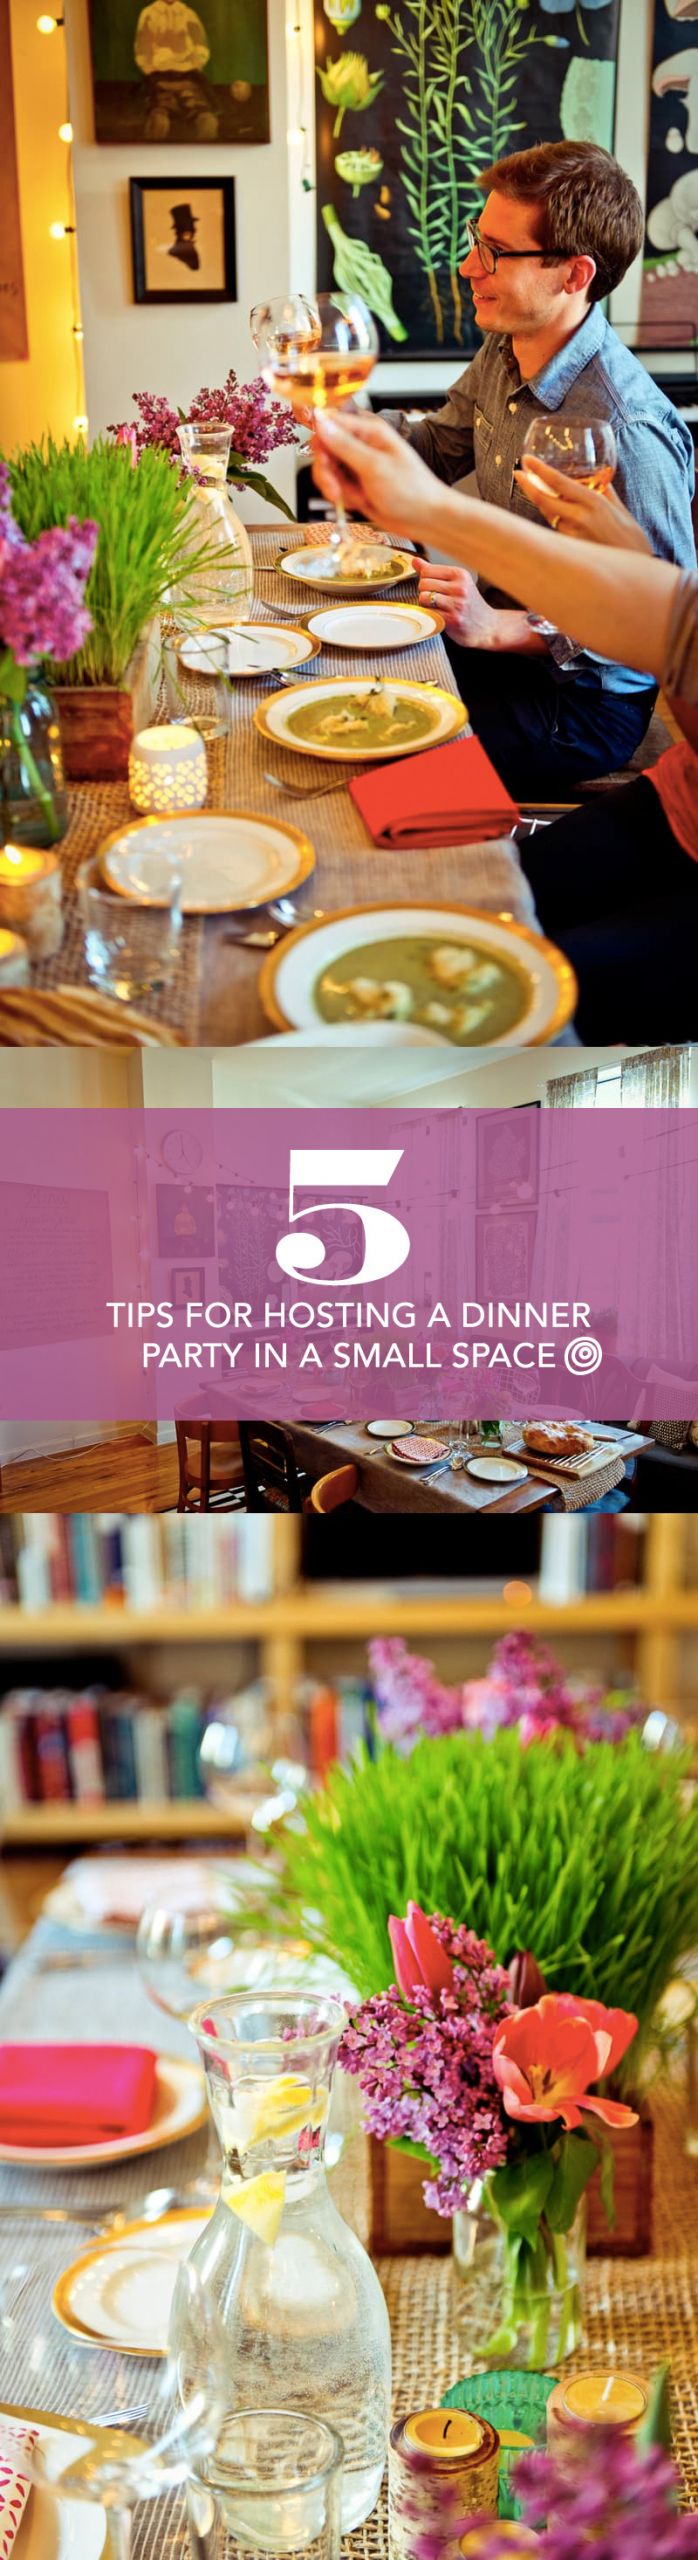 Small Dinner Party Menu Ideas
 5 Tips for Throwing a Dinner Party in a Small Apartment